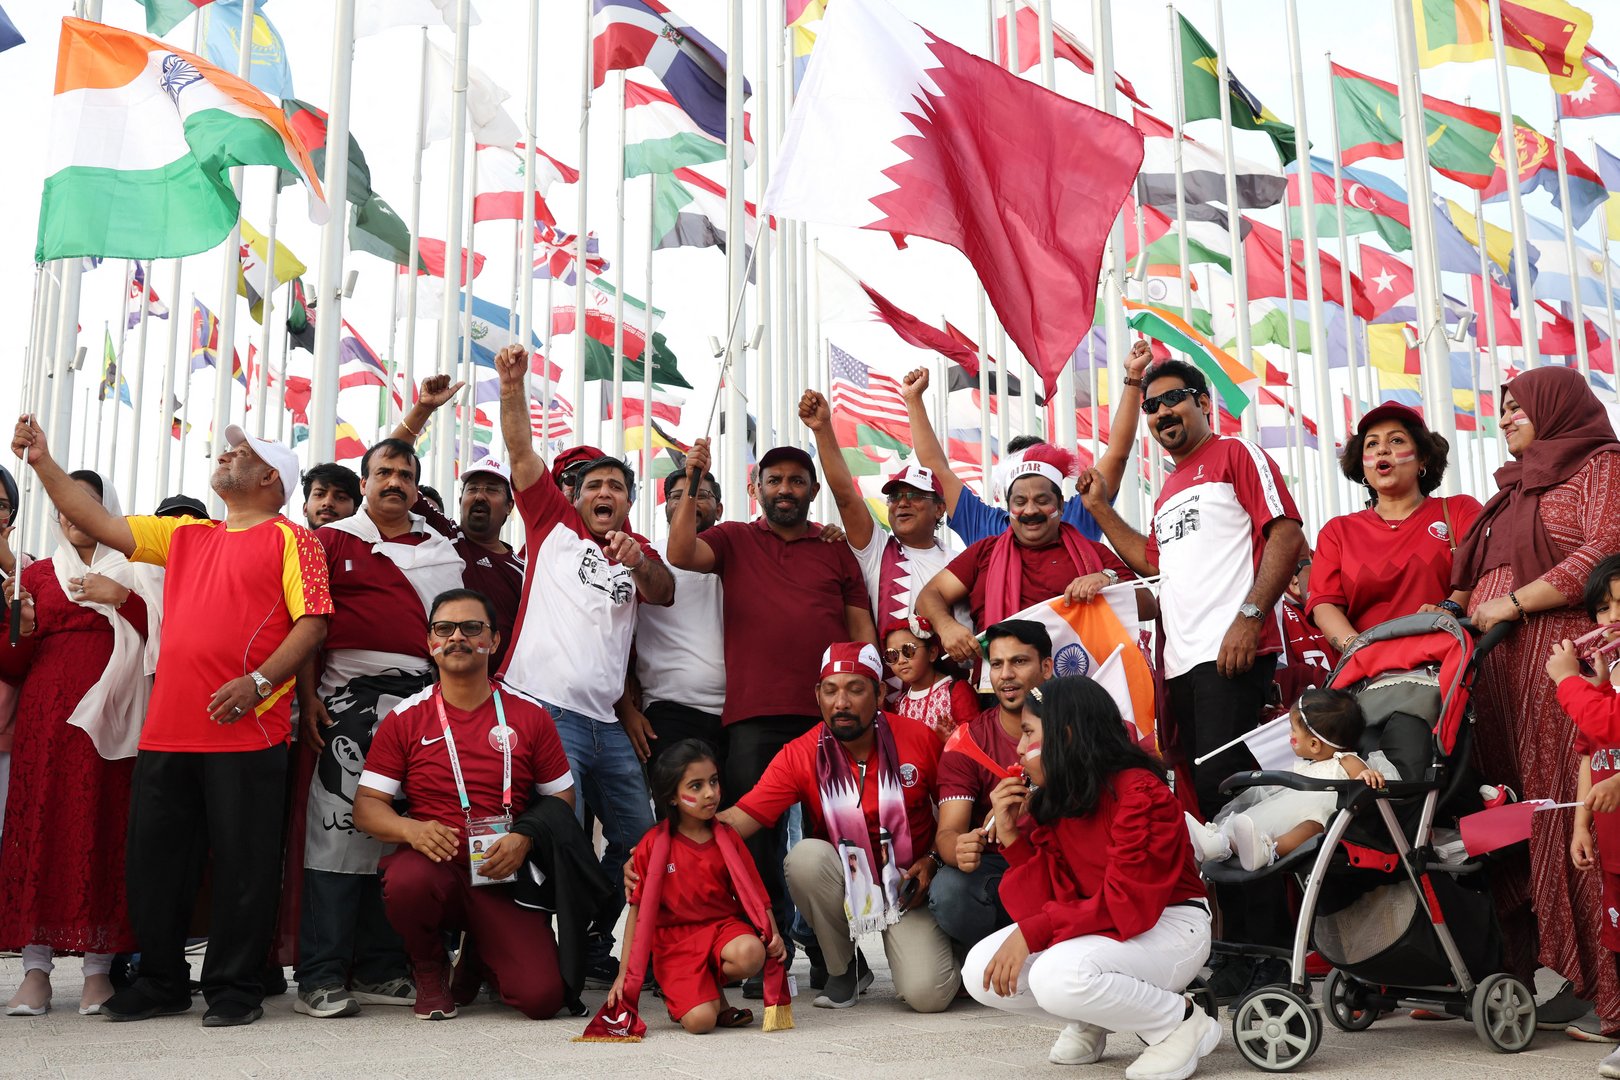 image Qatar World Cup: controversial but it’s still football